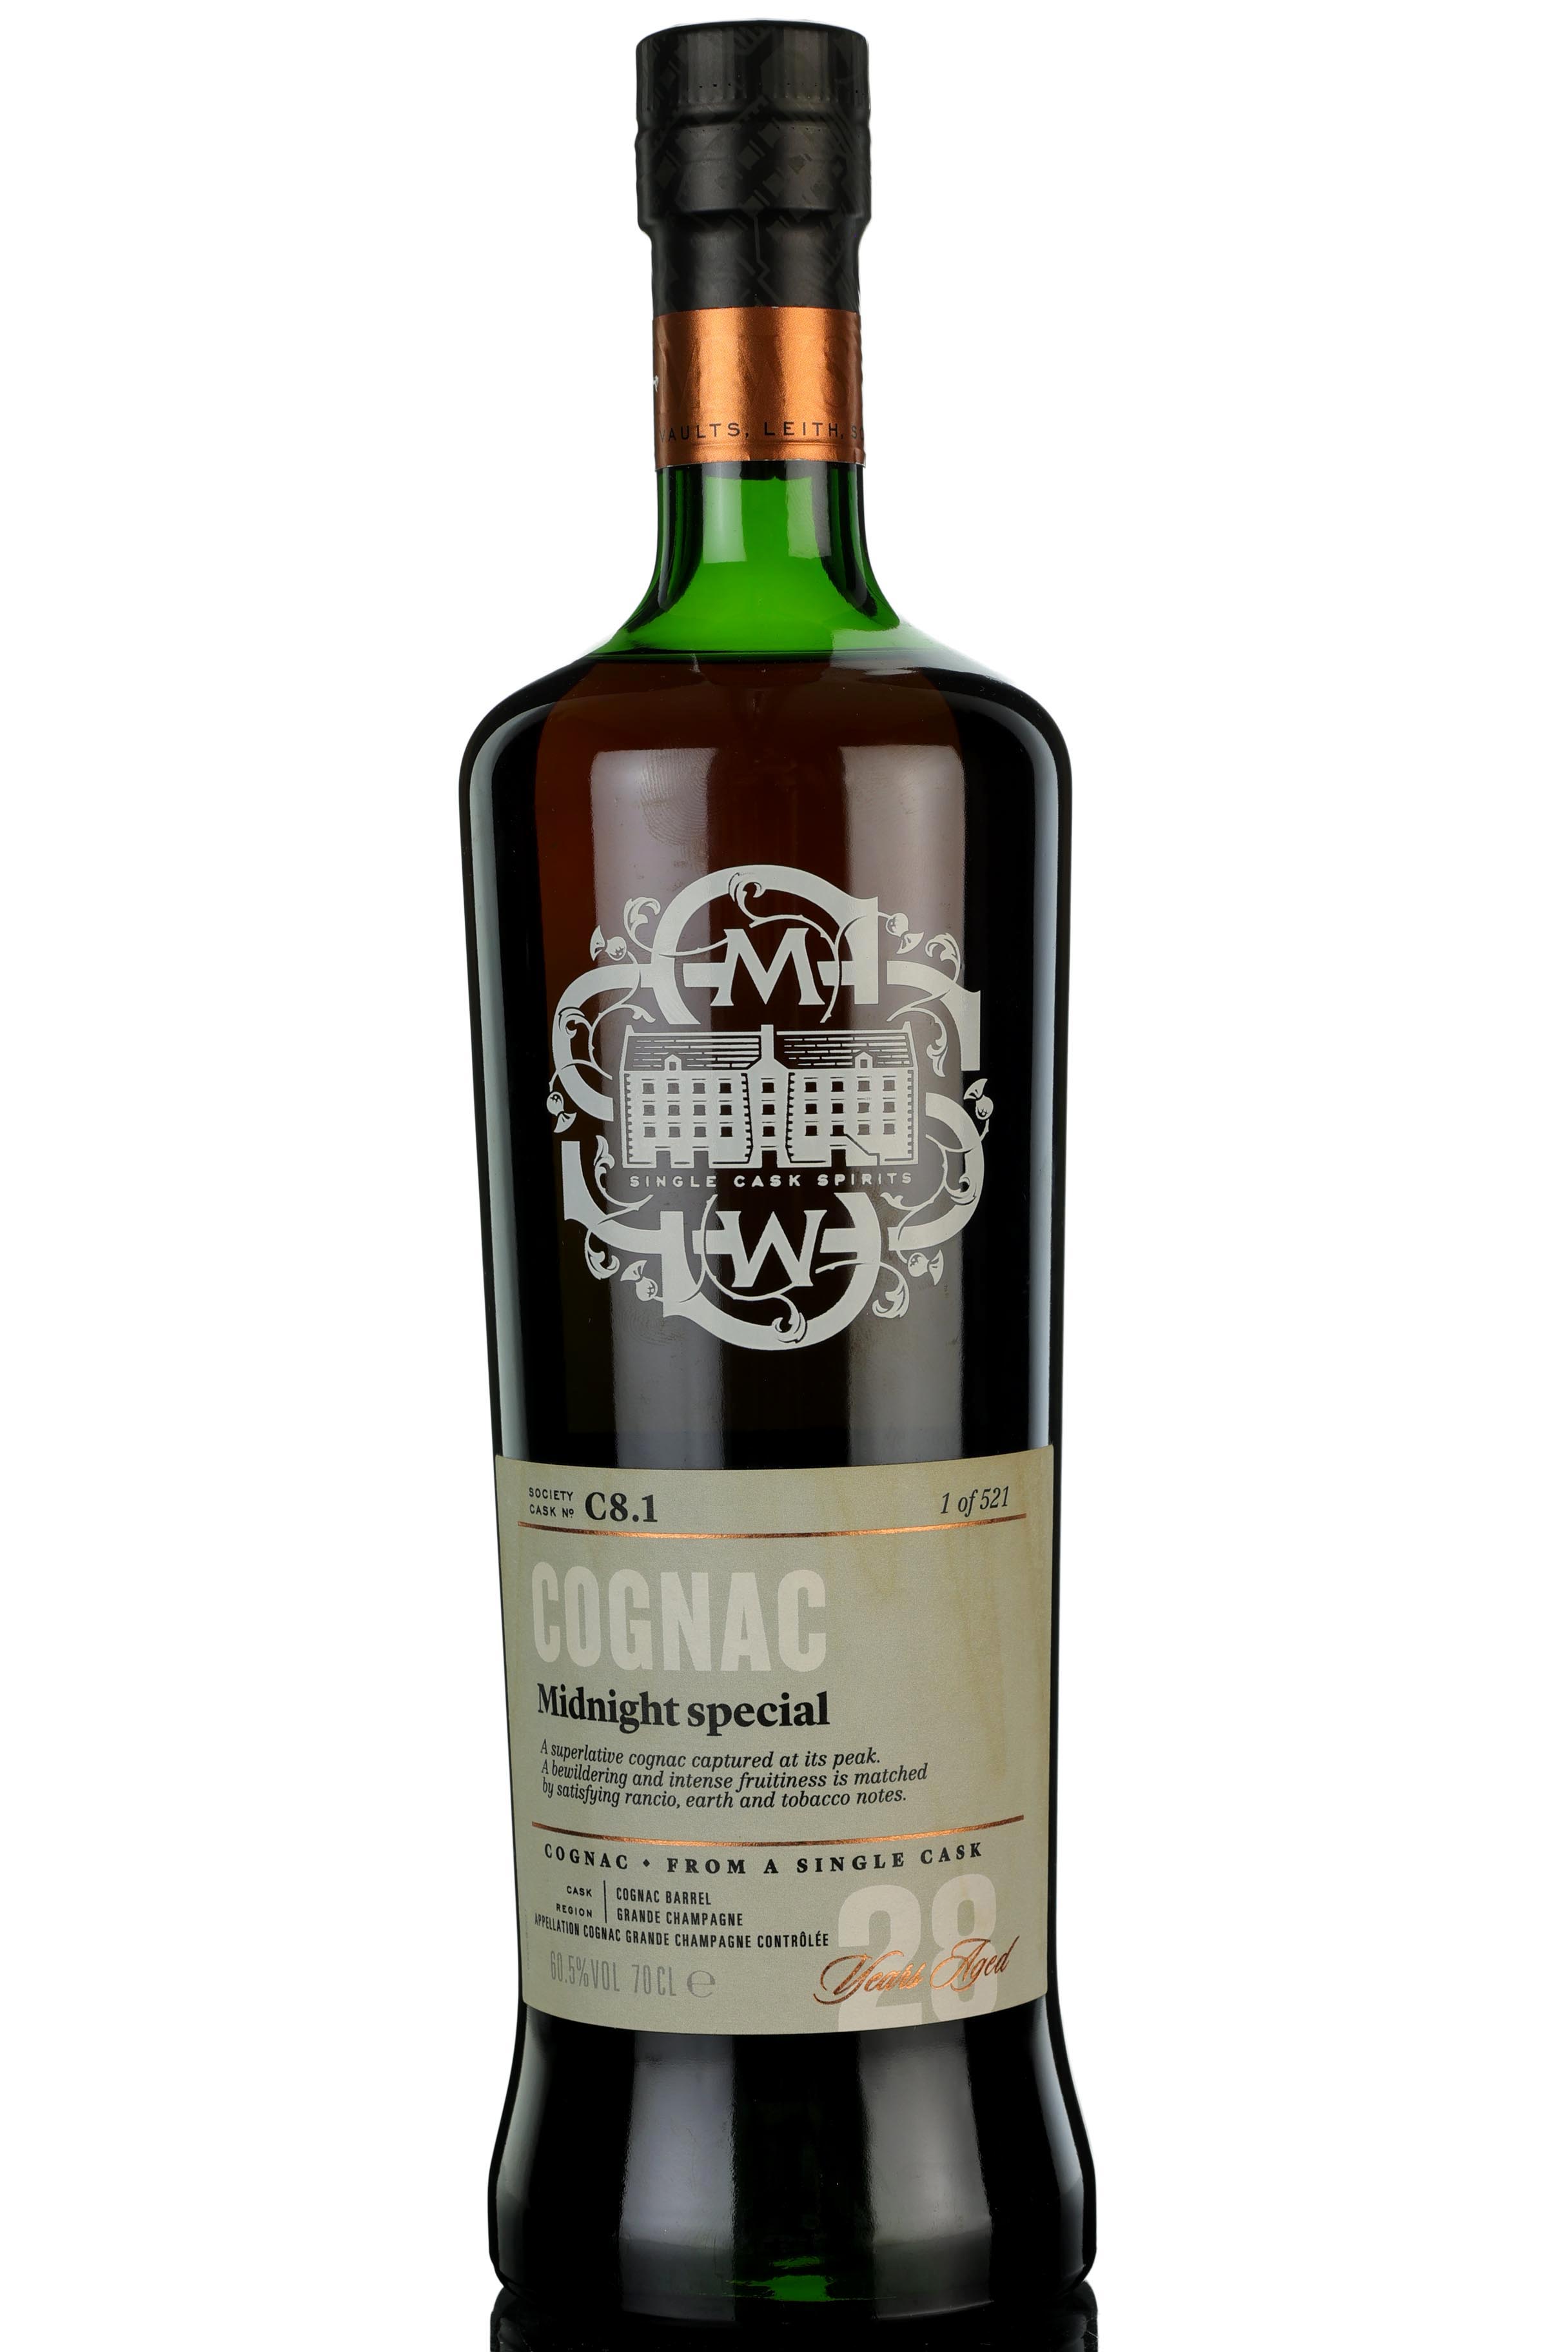 Marie C Bodit 28 Year Old Grande Champagne Cognac - SMWS C8.1 - Midnight Special